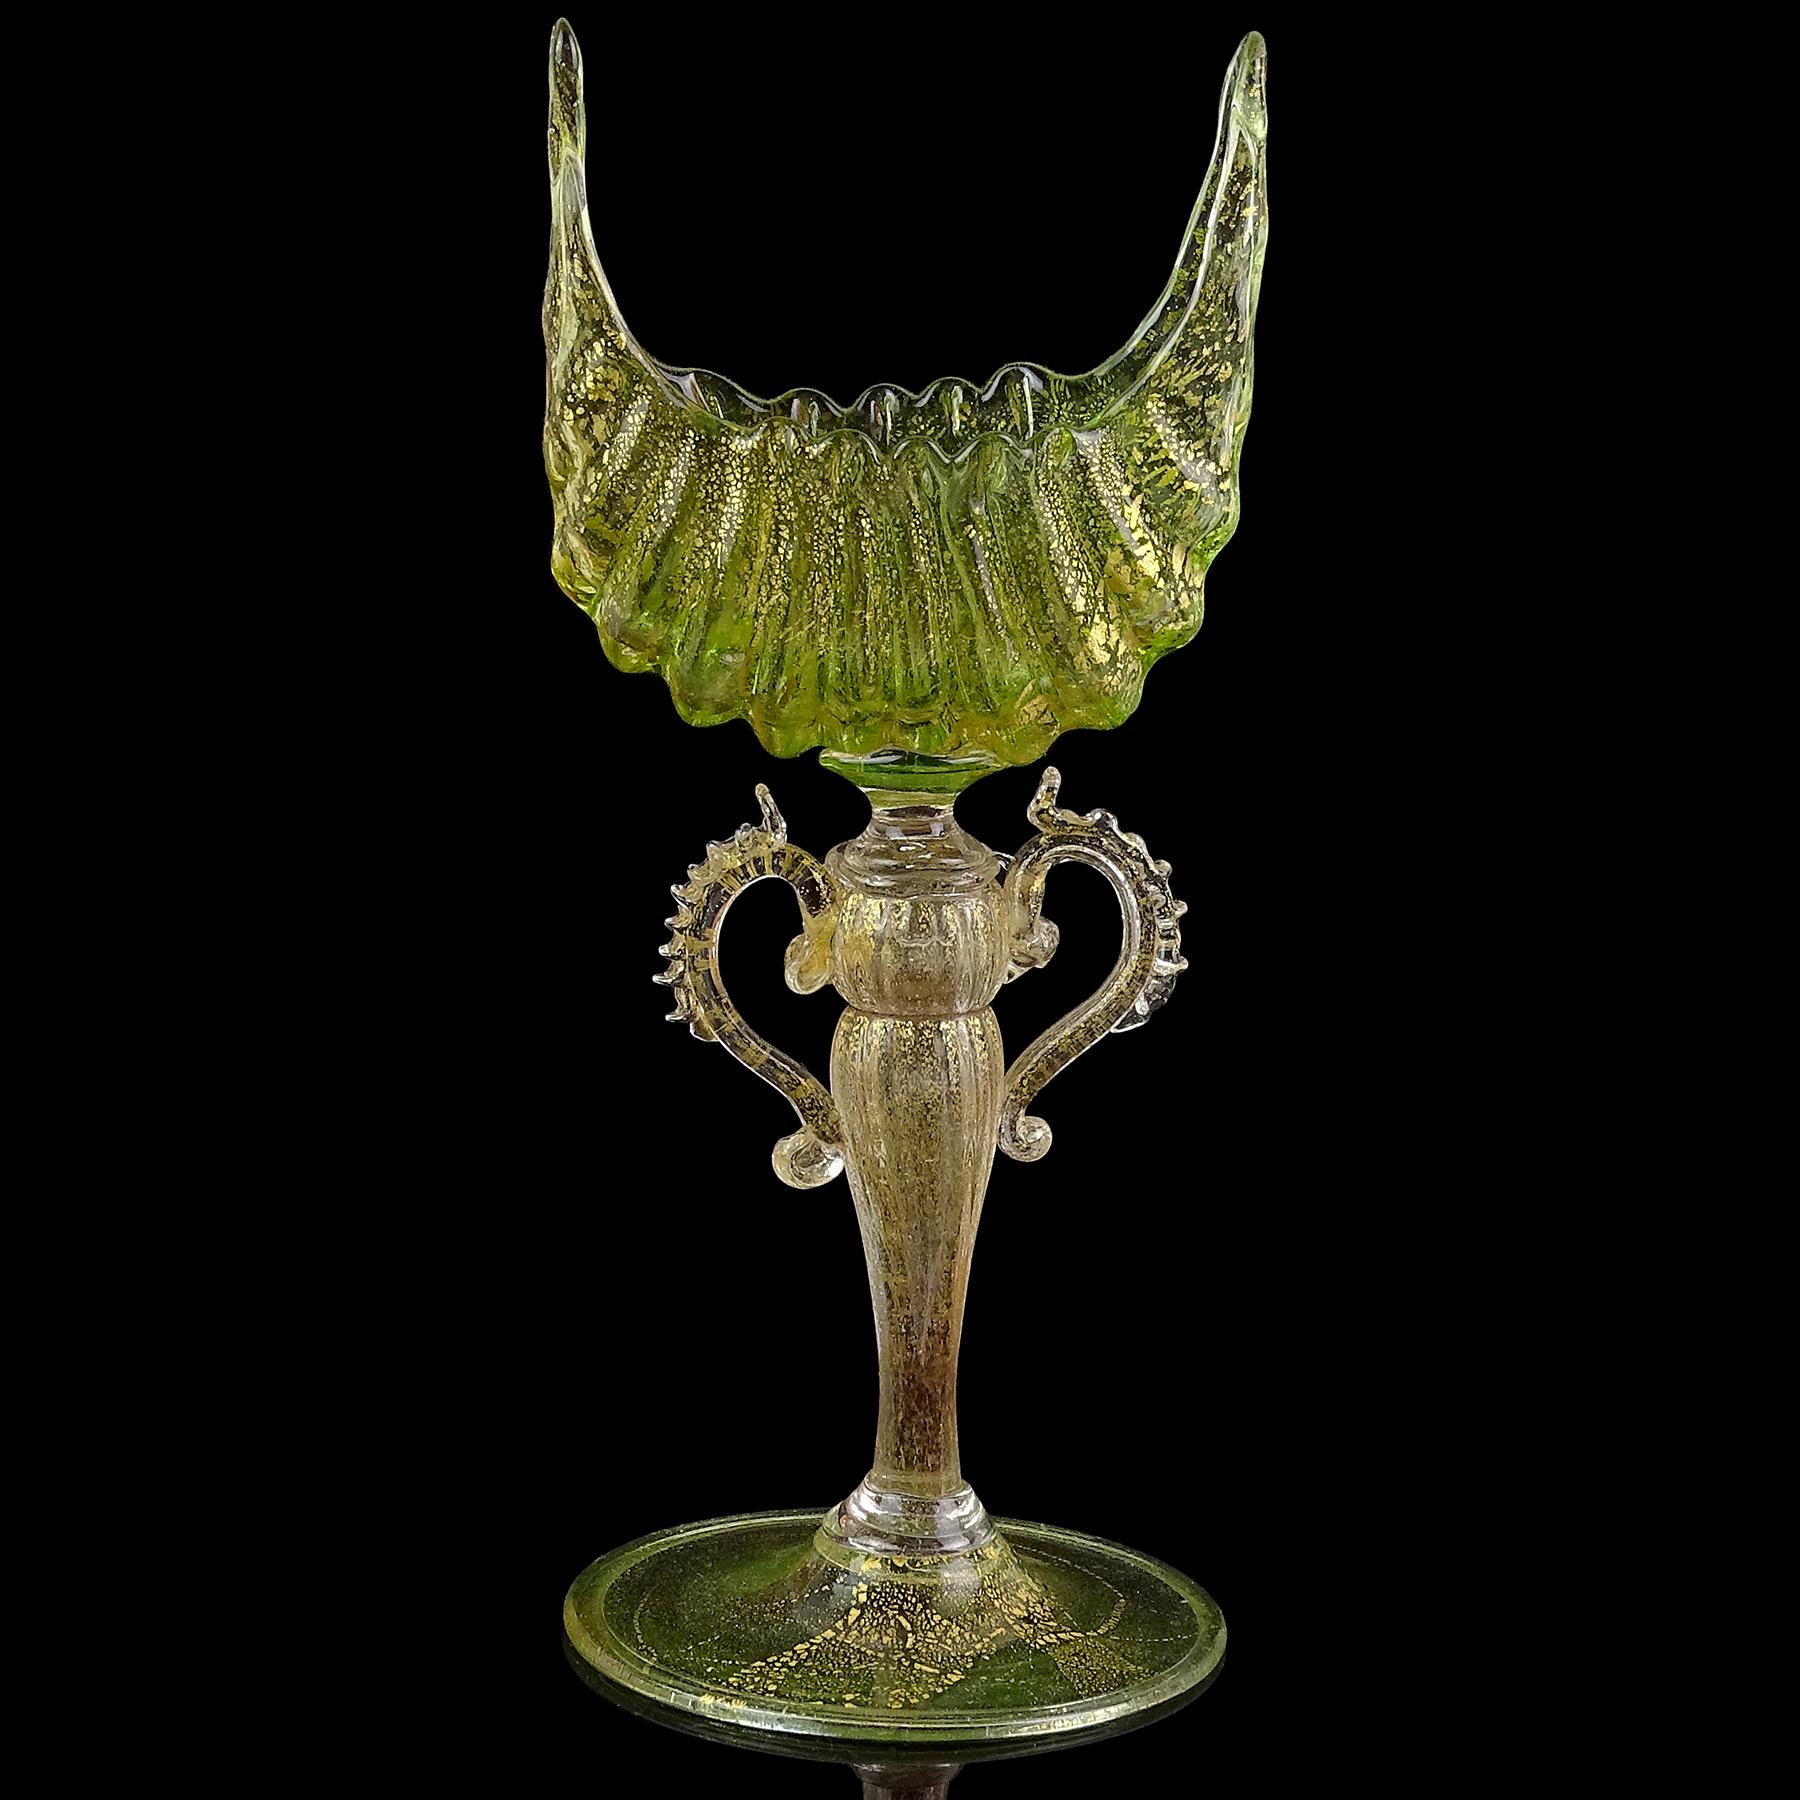 Beautiful, antique, early Venetian / Murano hand blown green and gold flecks Italian art glass seashell decoration decorative table object / card holder / goblet. Documented to the Salviati company, circa 1890-1900. The stem of the piece is made in